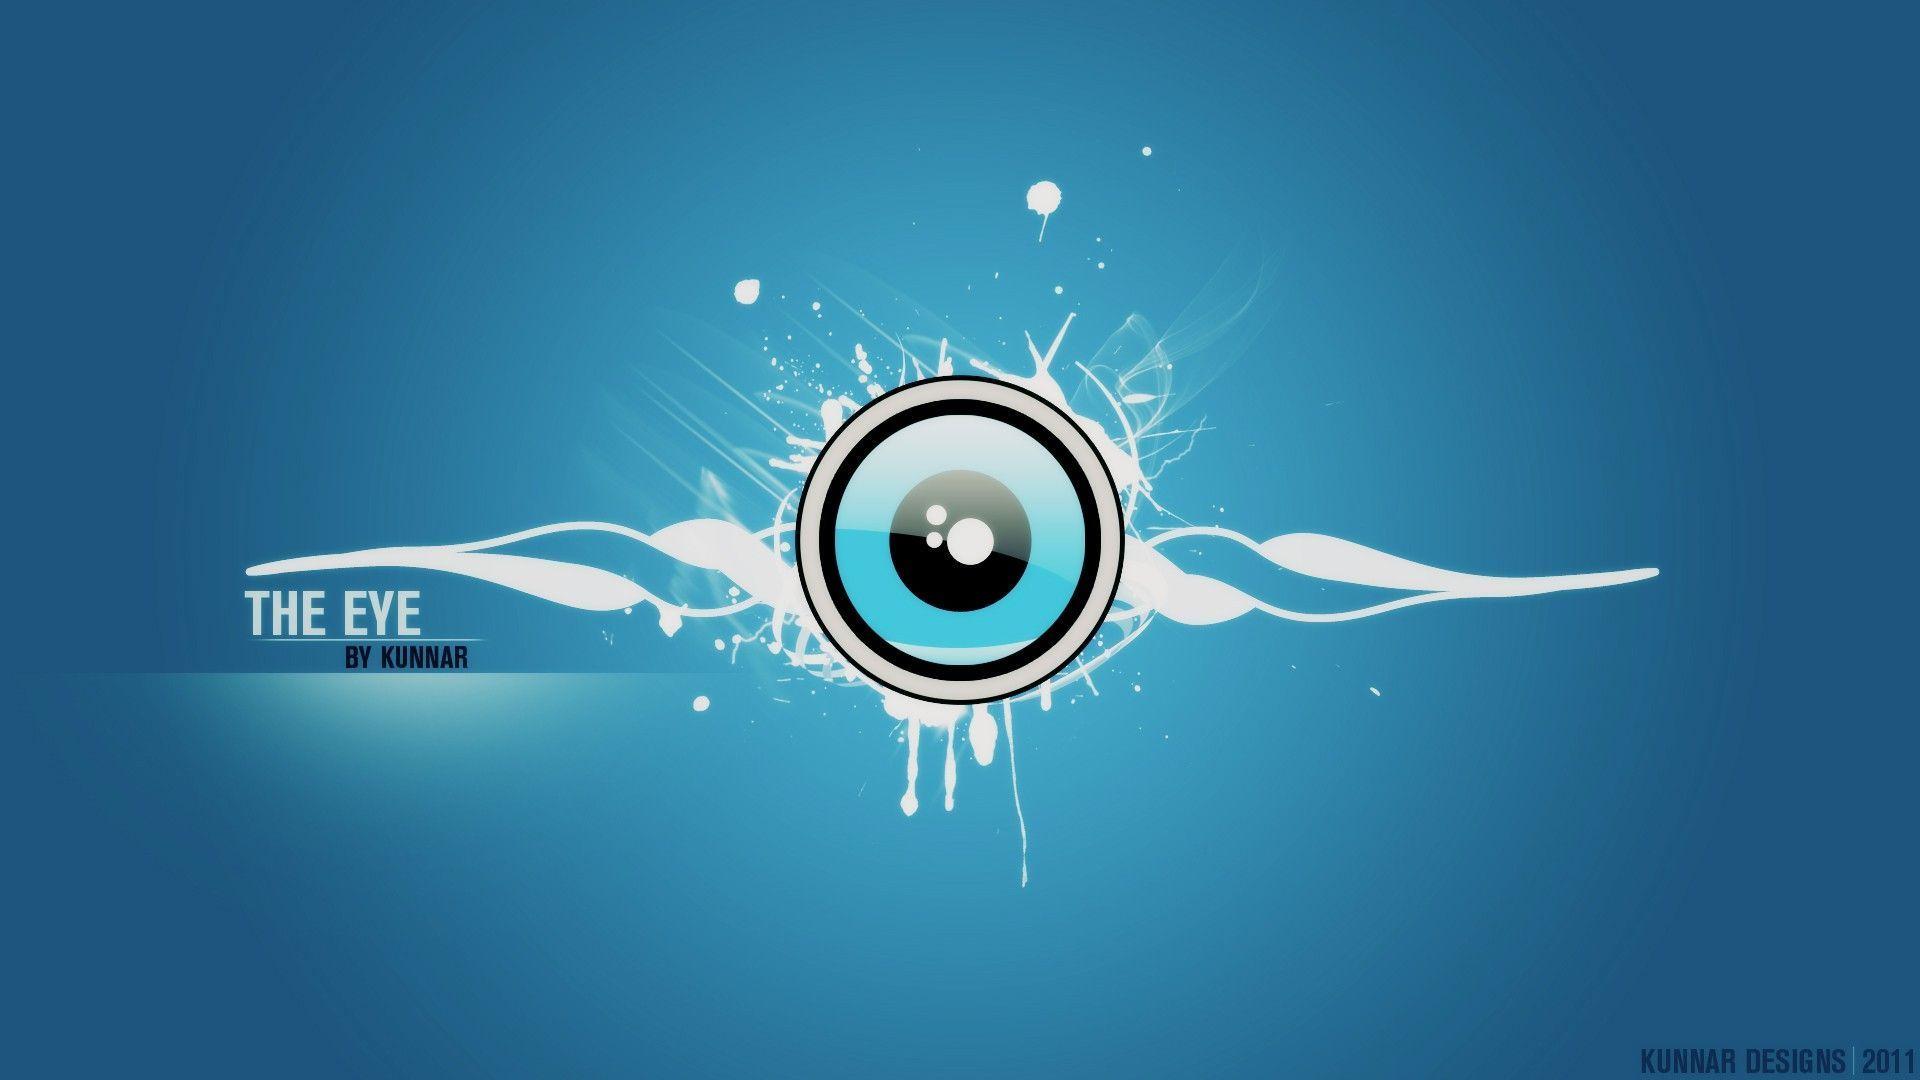 The Image of The Eye 3D 1920x1080 HD Wallpapers